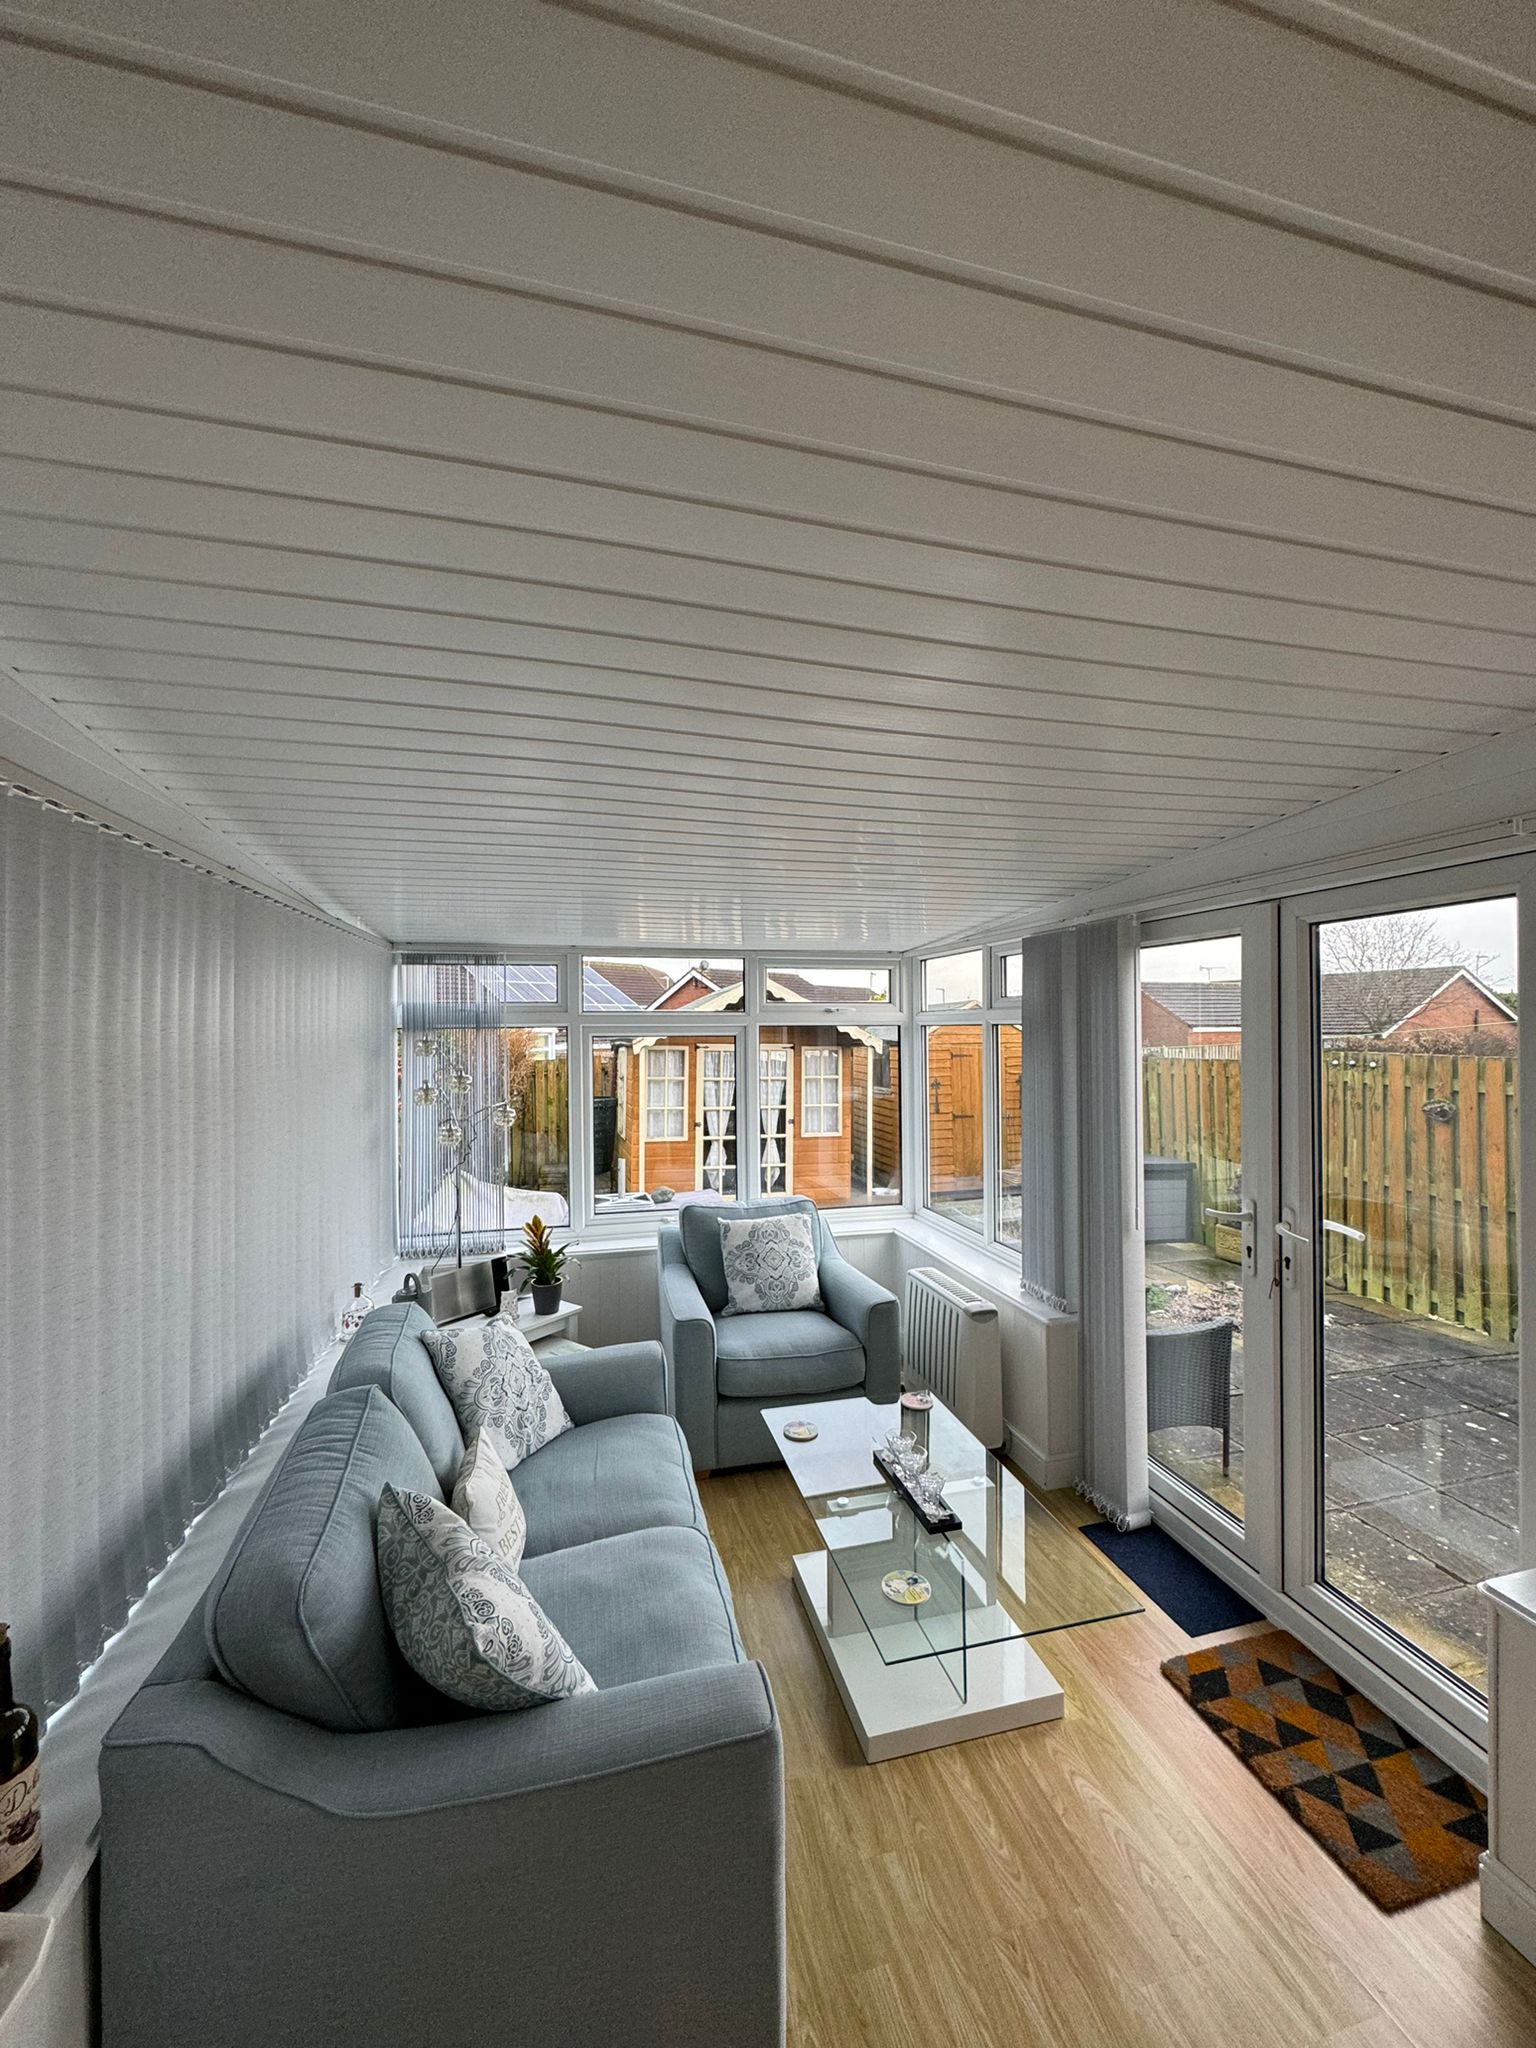 Yorkshire Conservatory Insulations Offers Game-Changing Insulated Conservatory Ceiling Solution